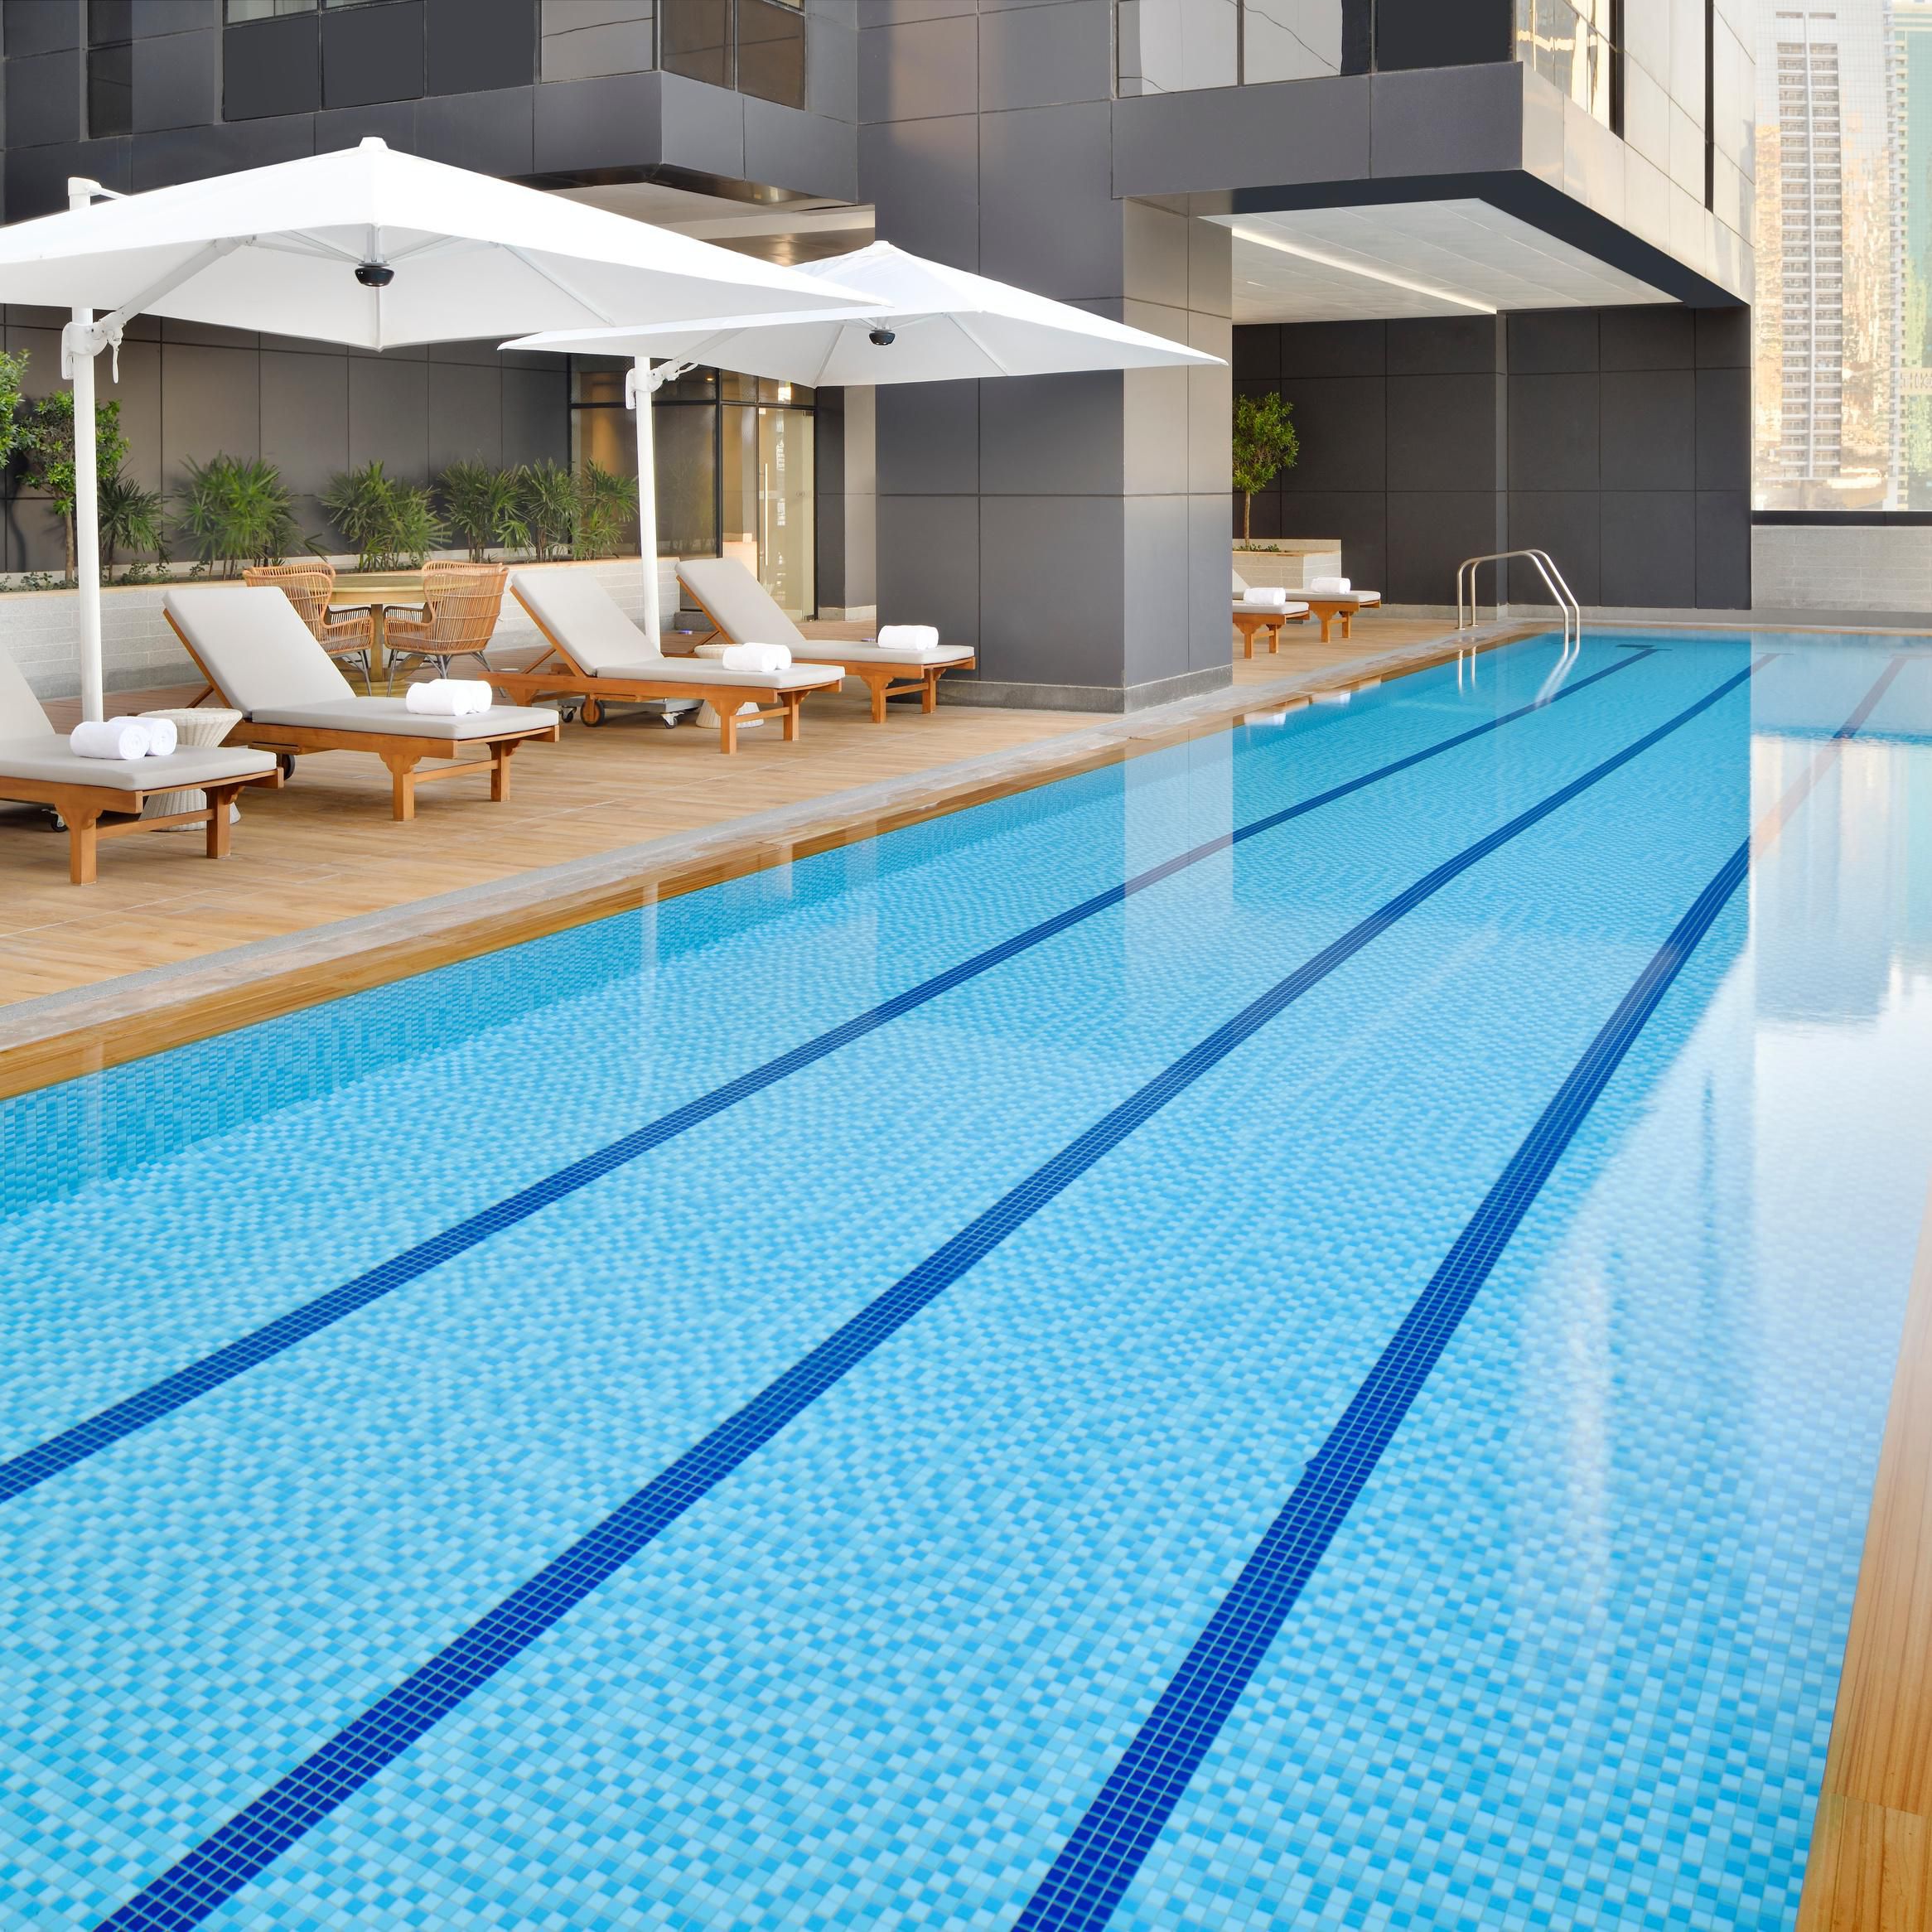 Our swimming pool is a perfect spot for health and wellness